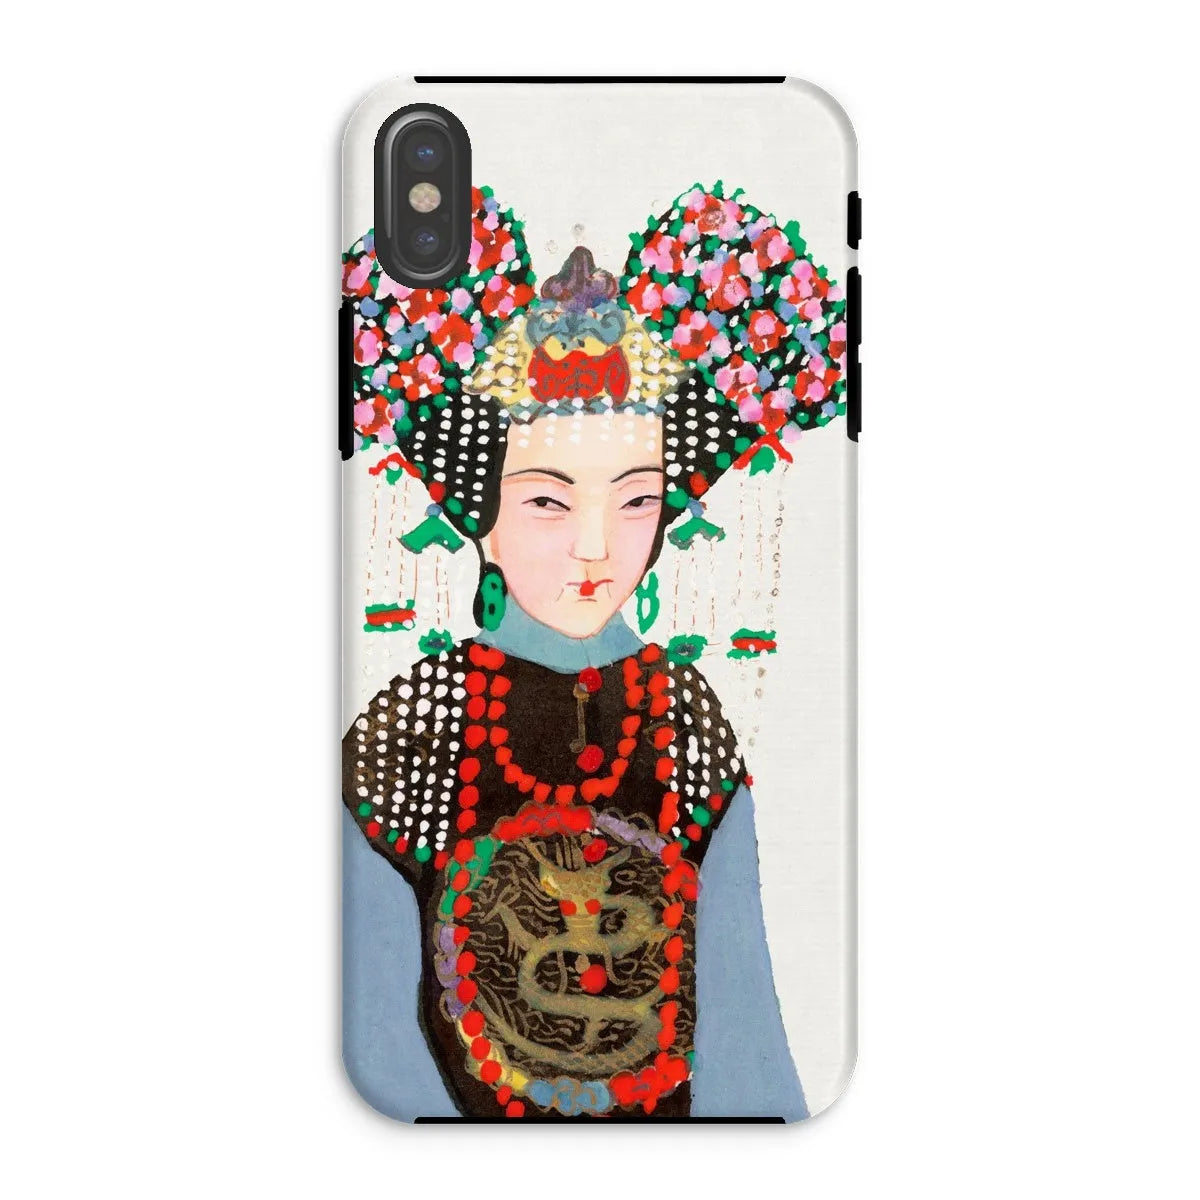 Chinese Empress - Manchu Art Phone Case - Iphone Xs / Matte - Mobile Phone Cases - Aesthetic Art